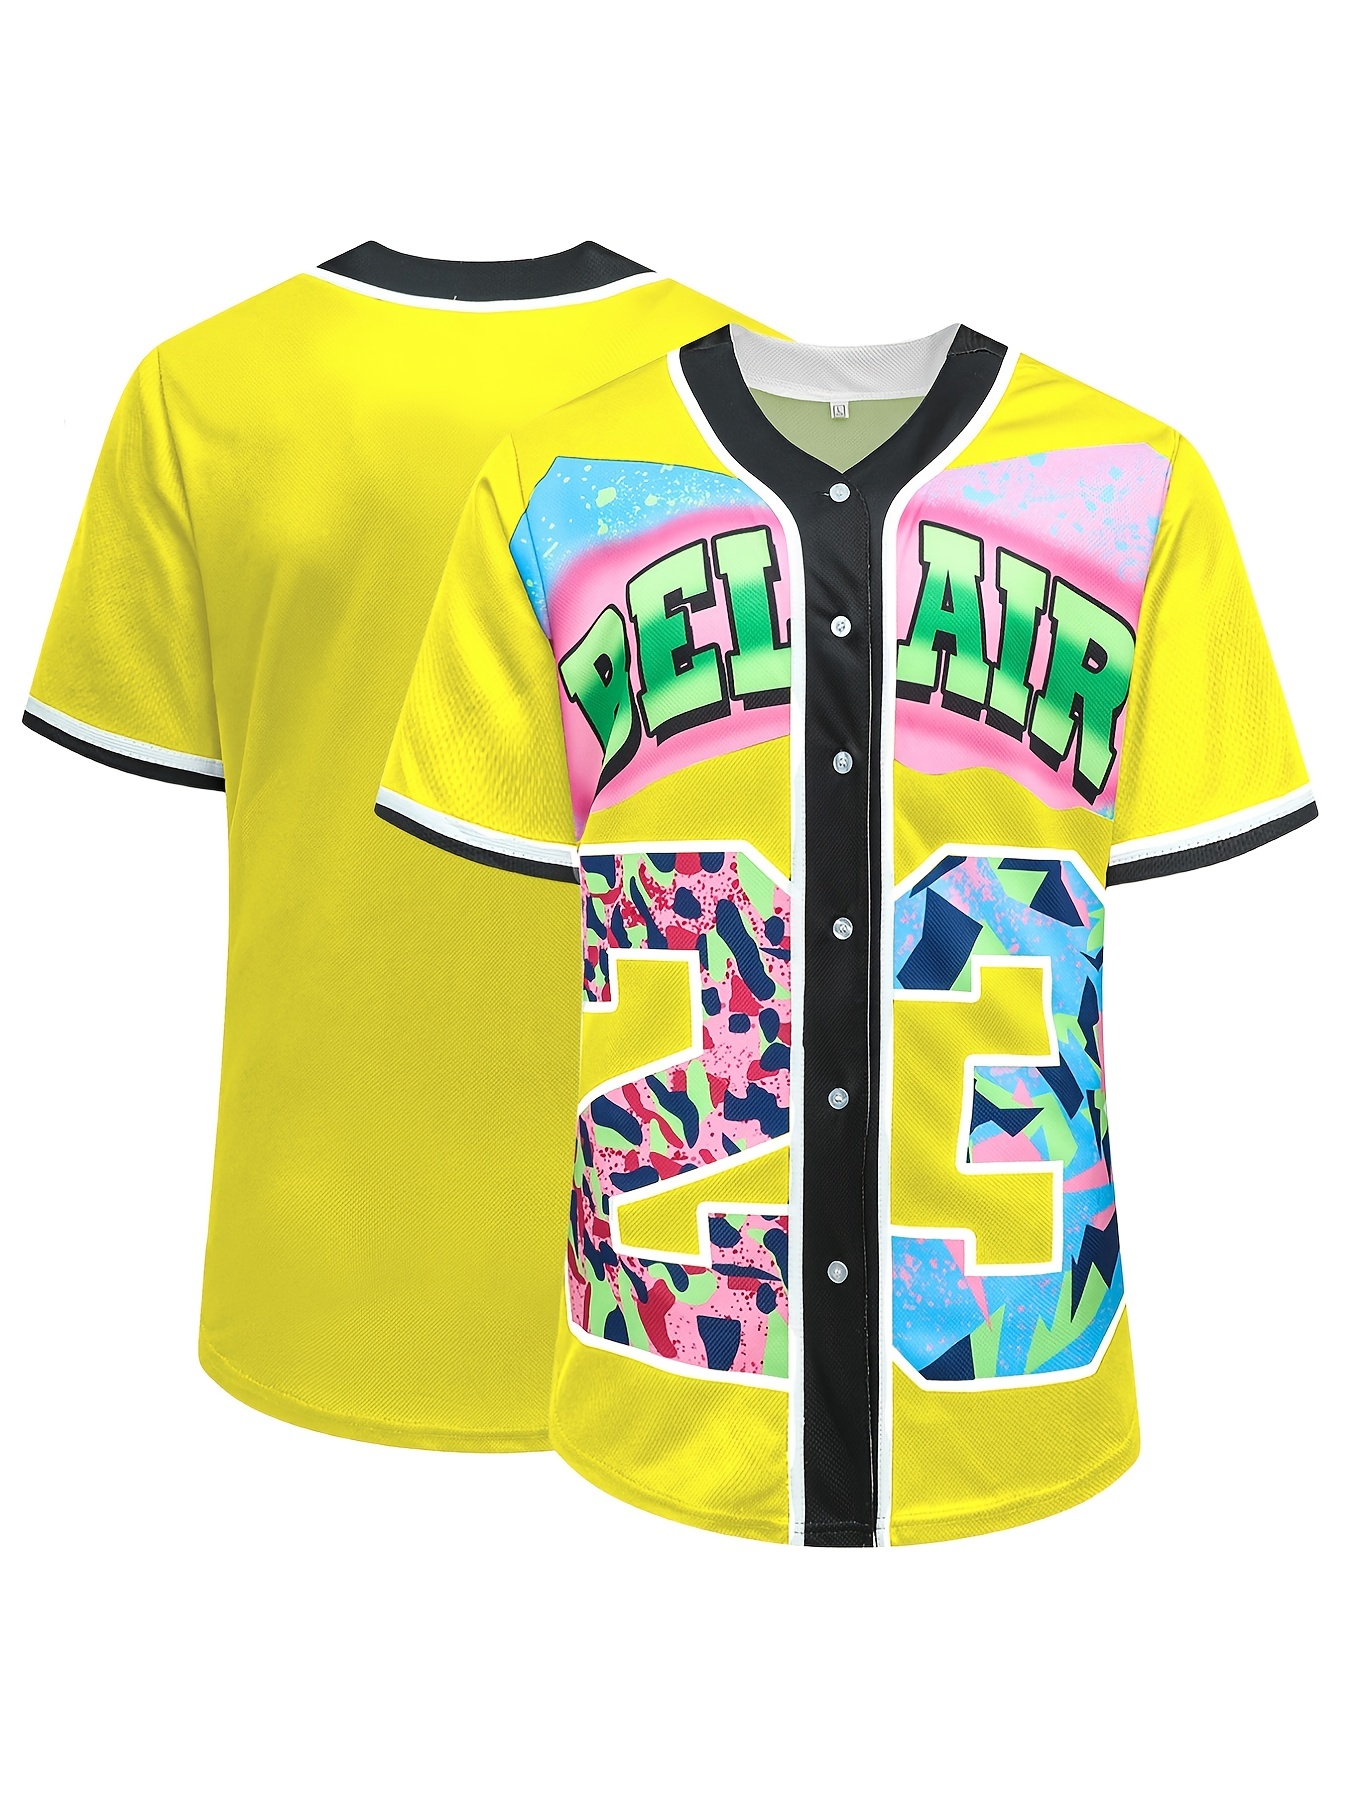 90s Outfit For Women,yellow 23 Hip Hop Baseball Jersey Shirt For